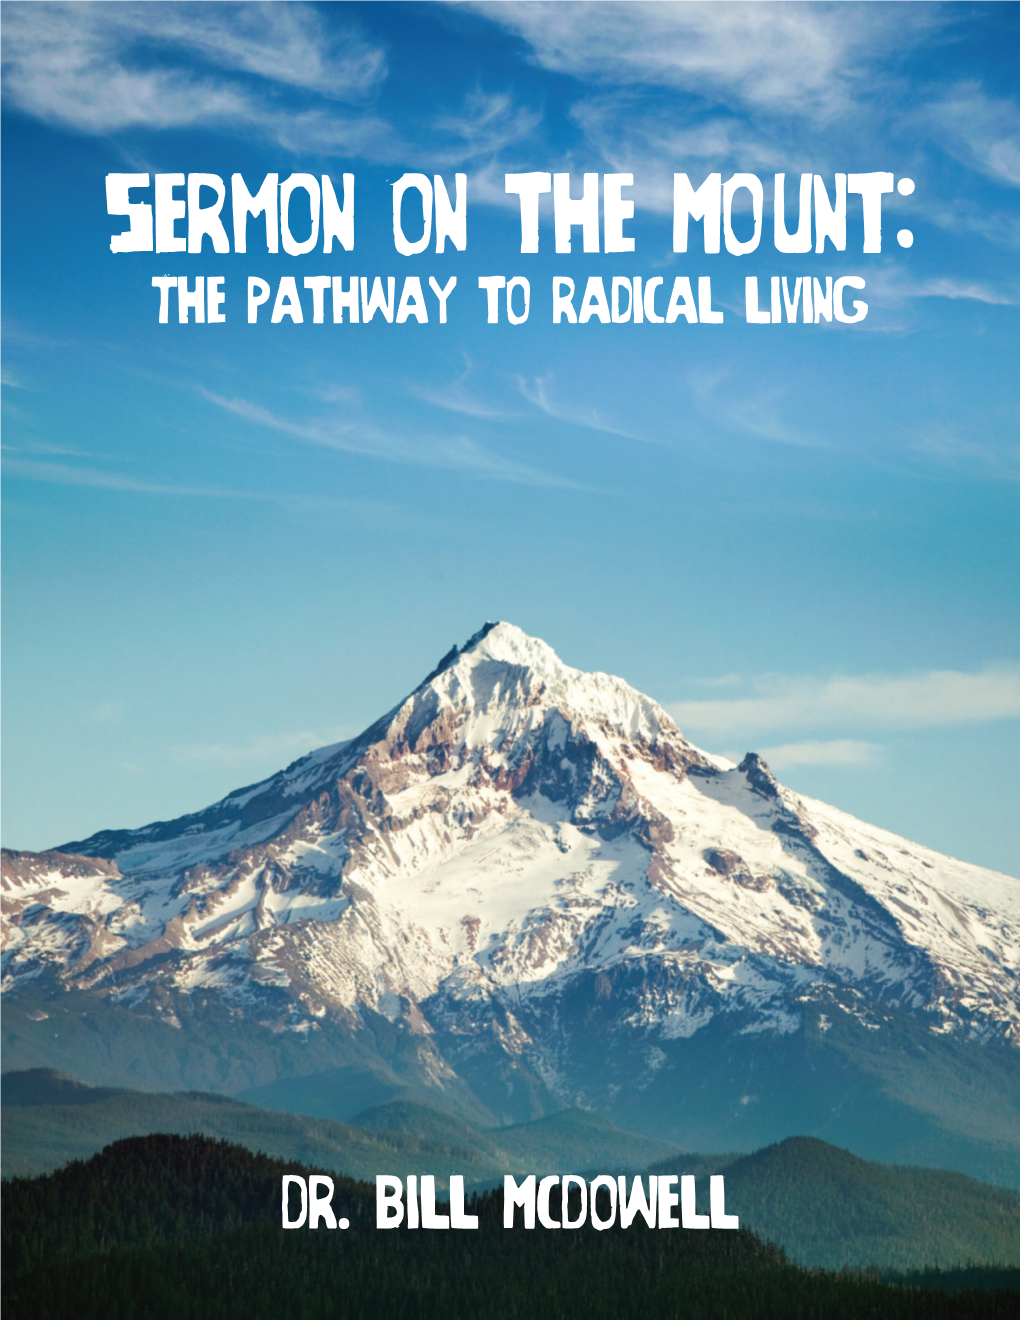 Sermon on the Mount: the Pathway to Radical Living